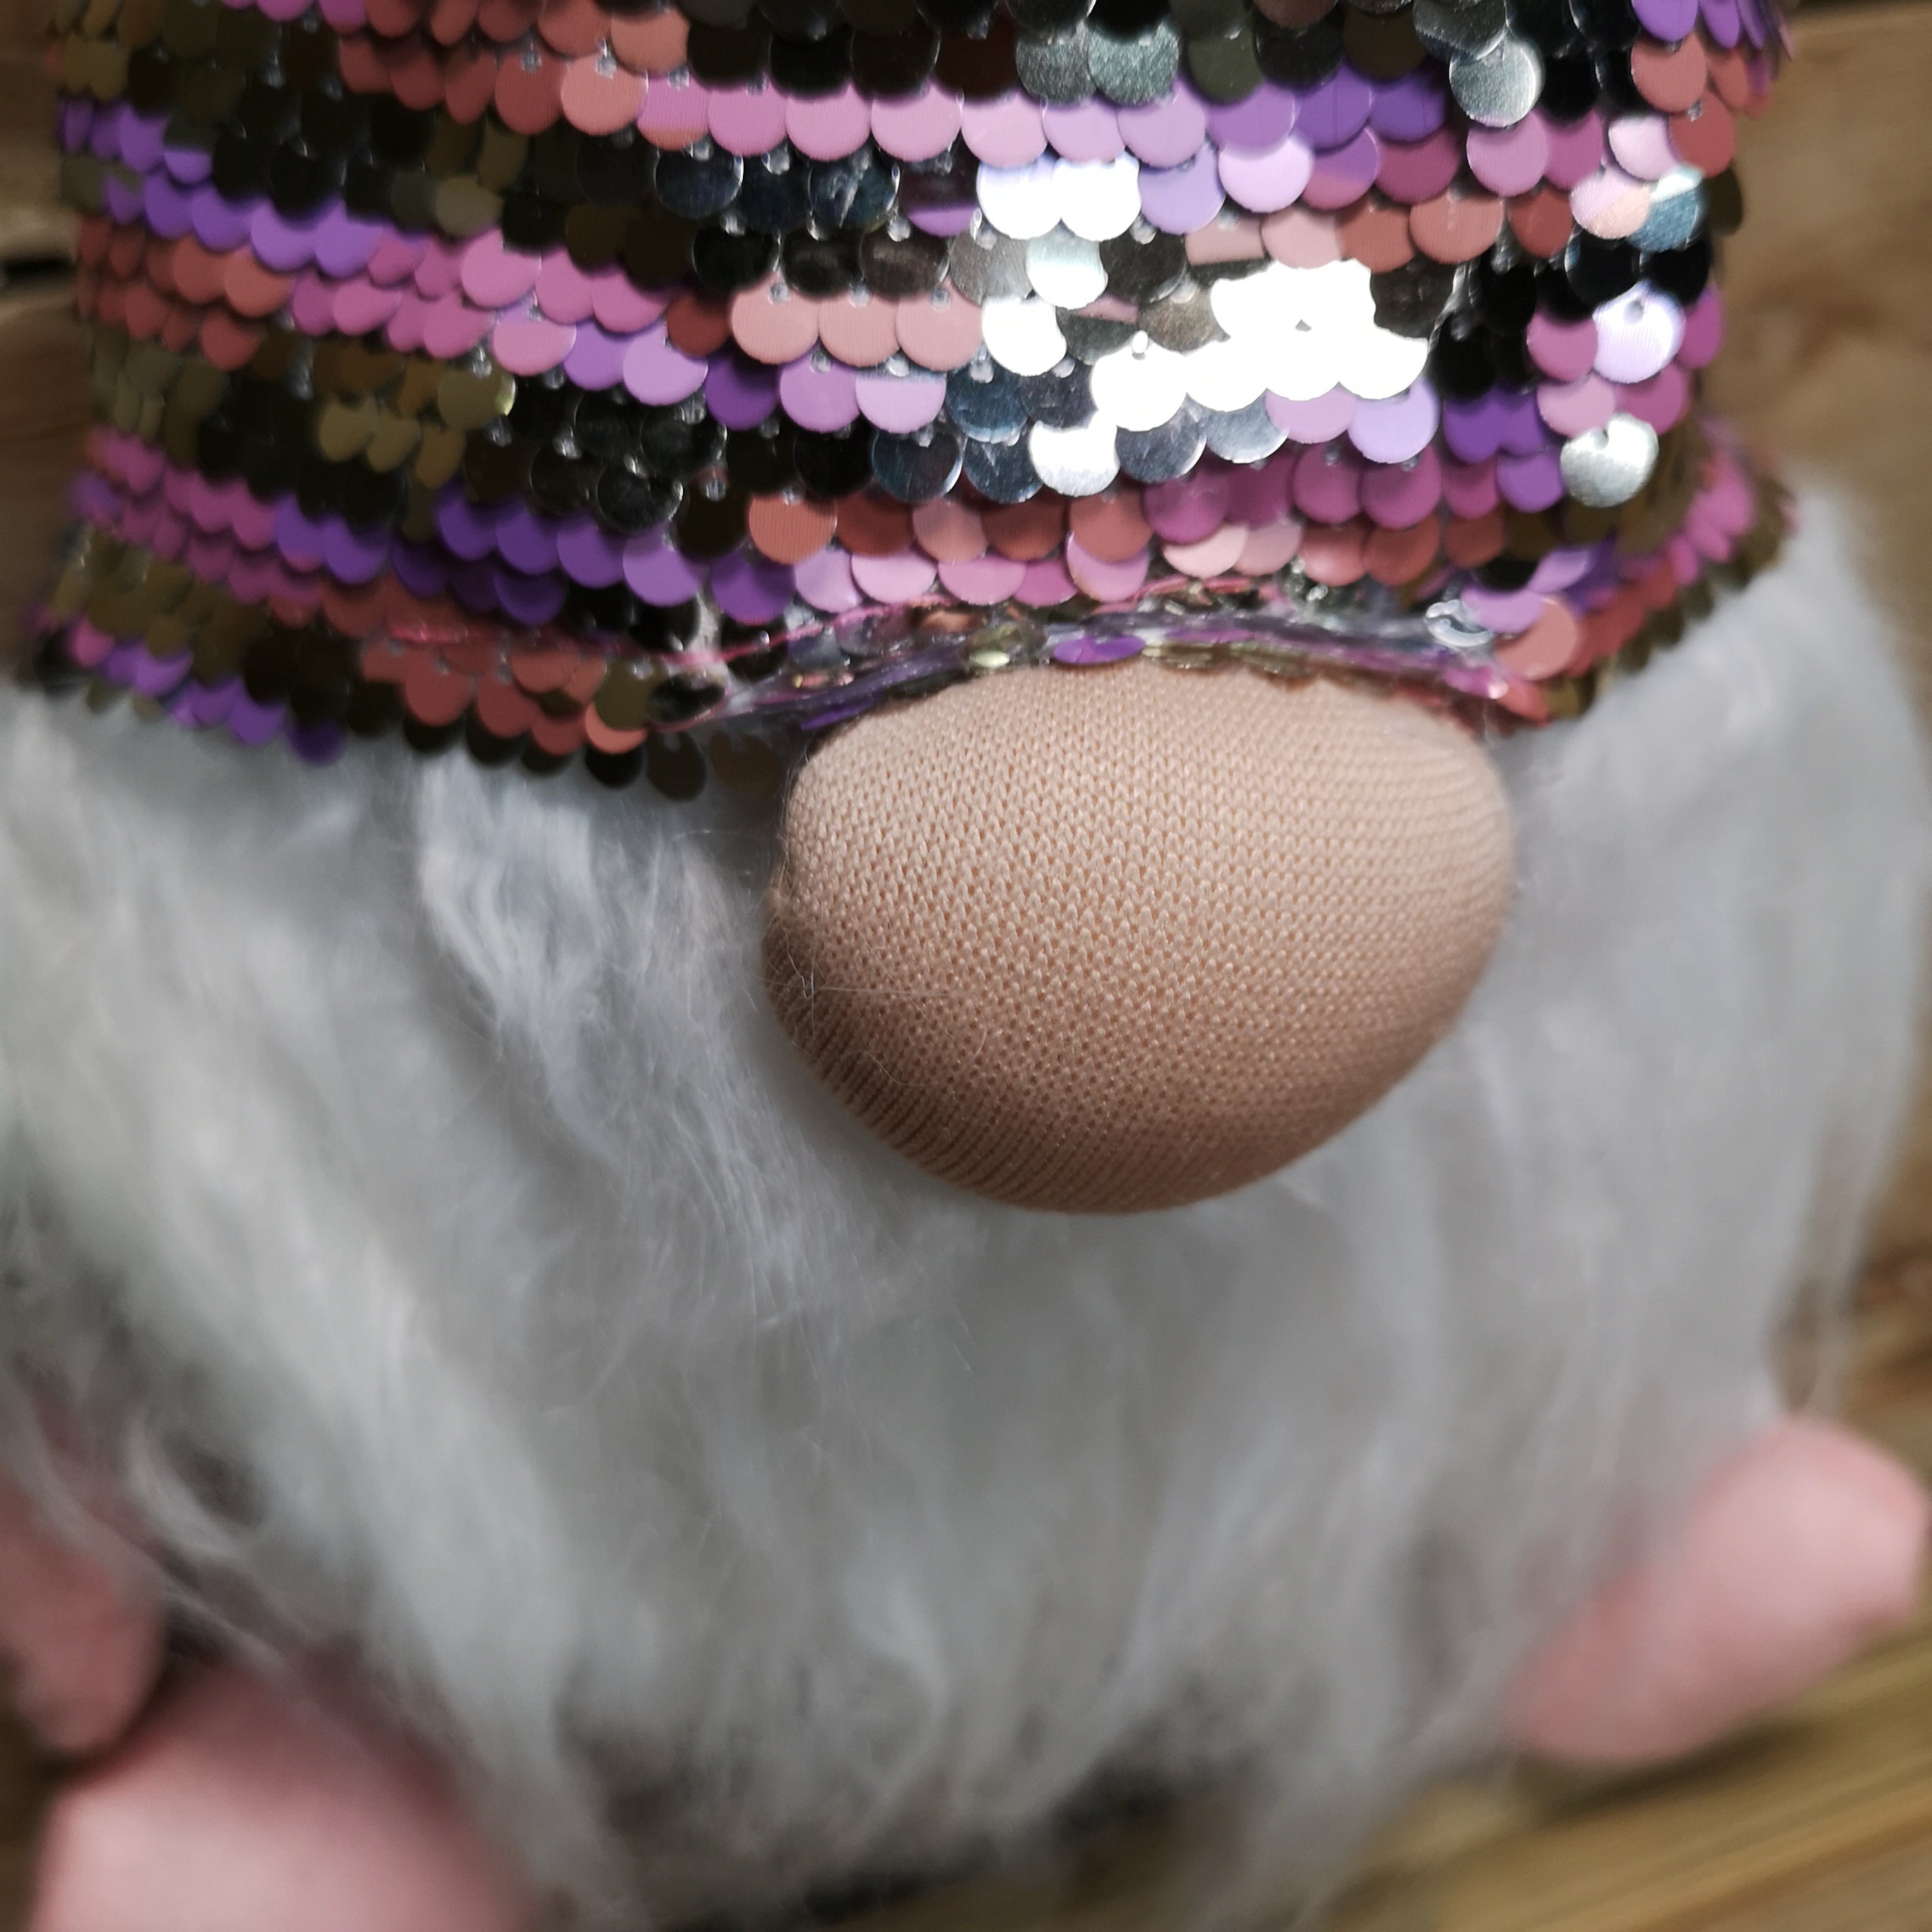 46cm Plush Christmas Bearded Gonk with Pink & Silver Sequined Hat Christmas Decoration